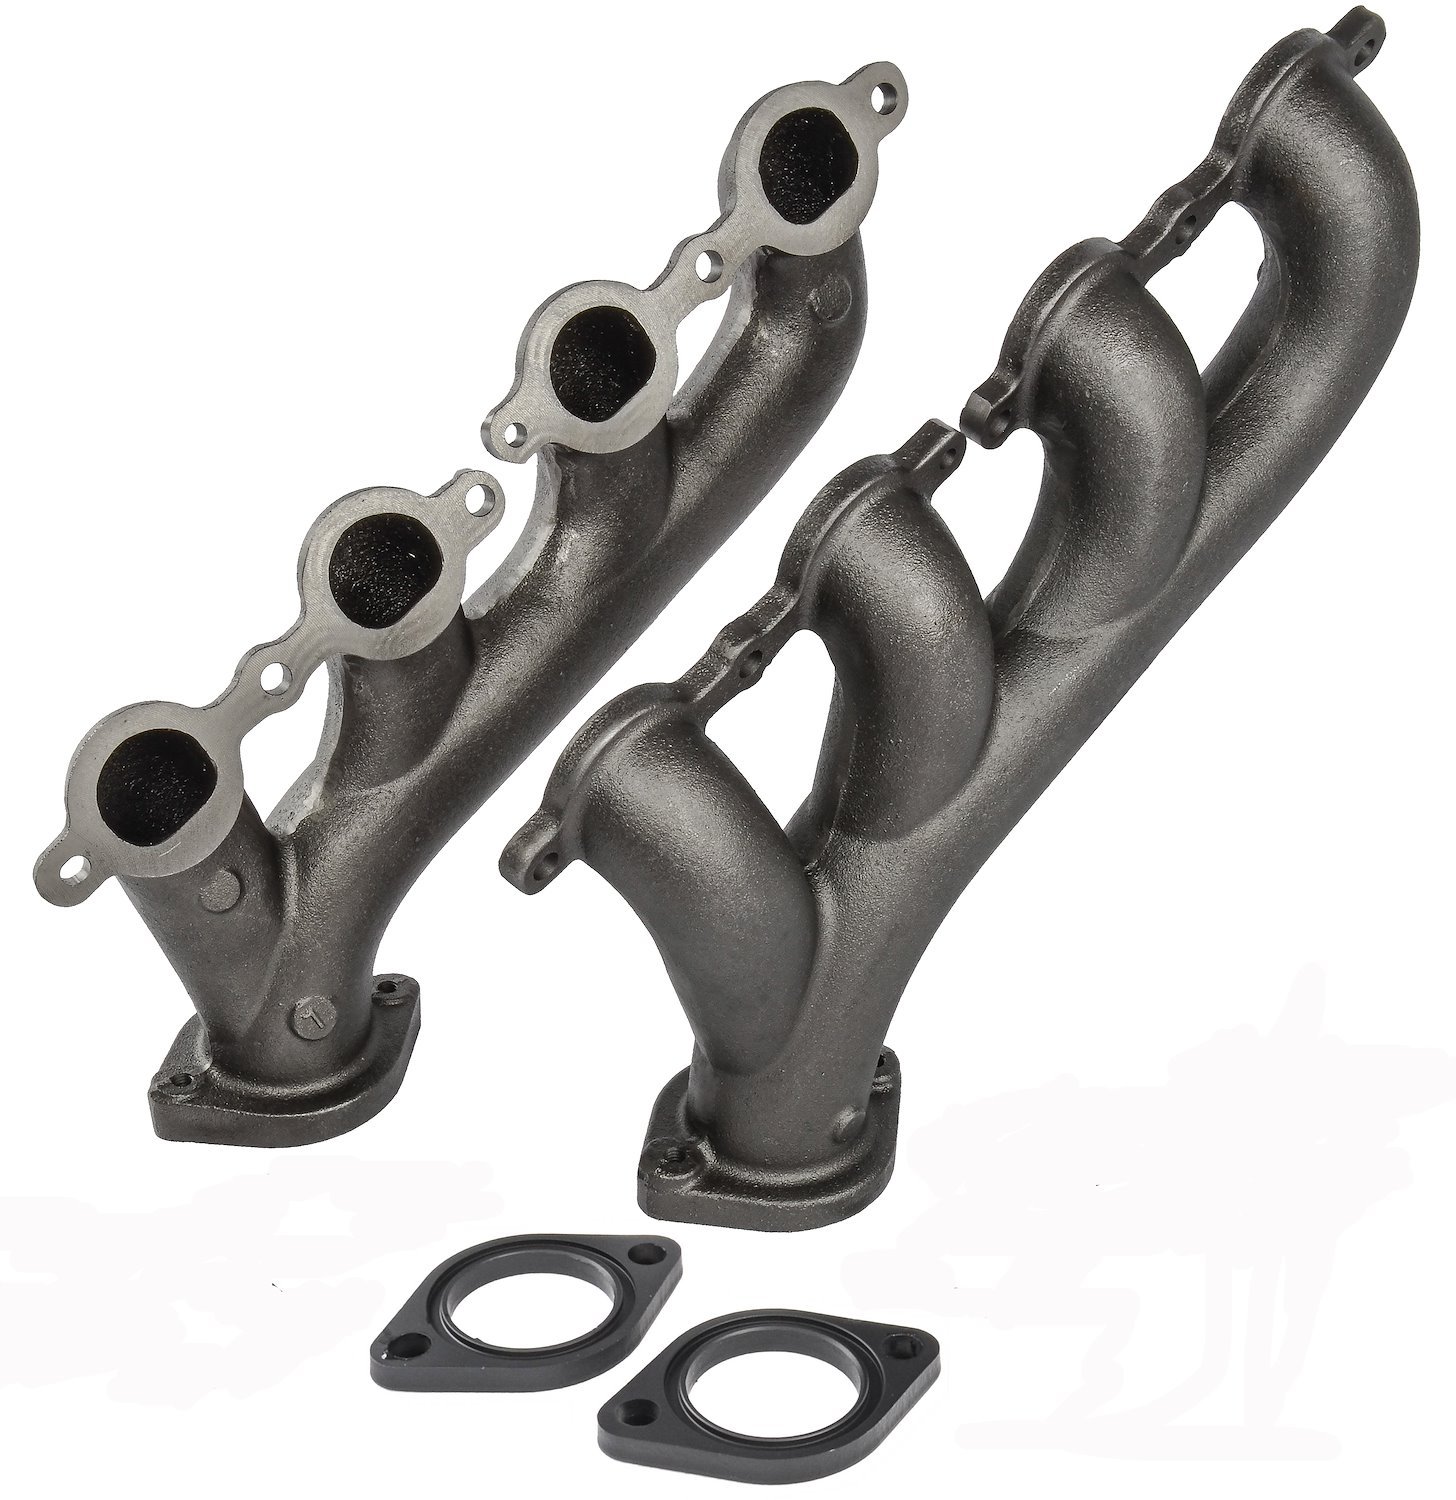 Exhaust Manifolds for 2002-2012 GM LS Engines [Raw Cast Iron]